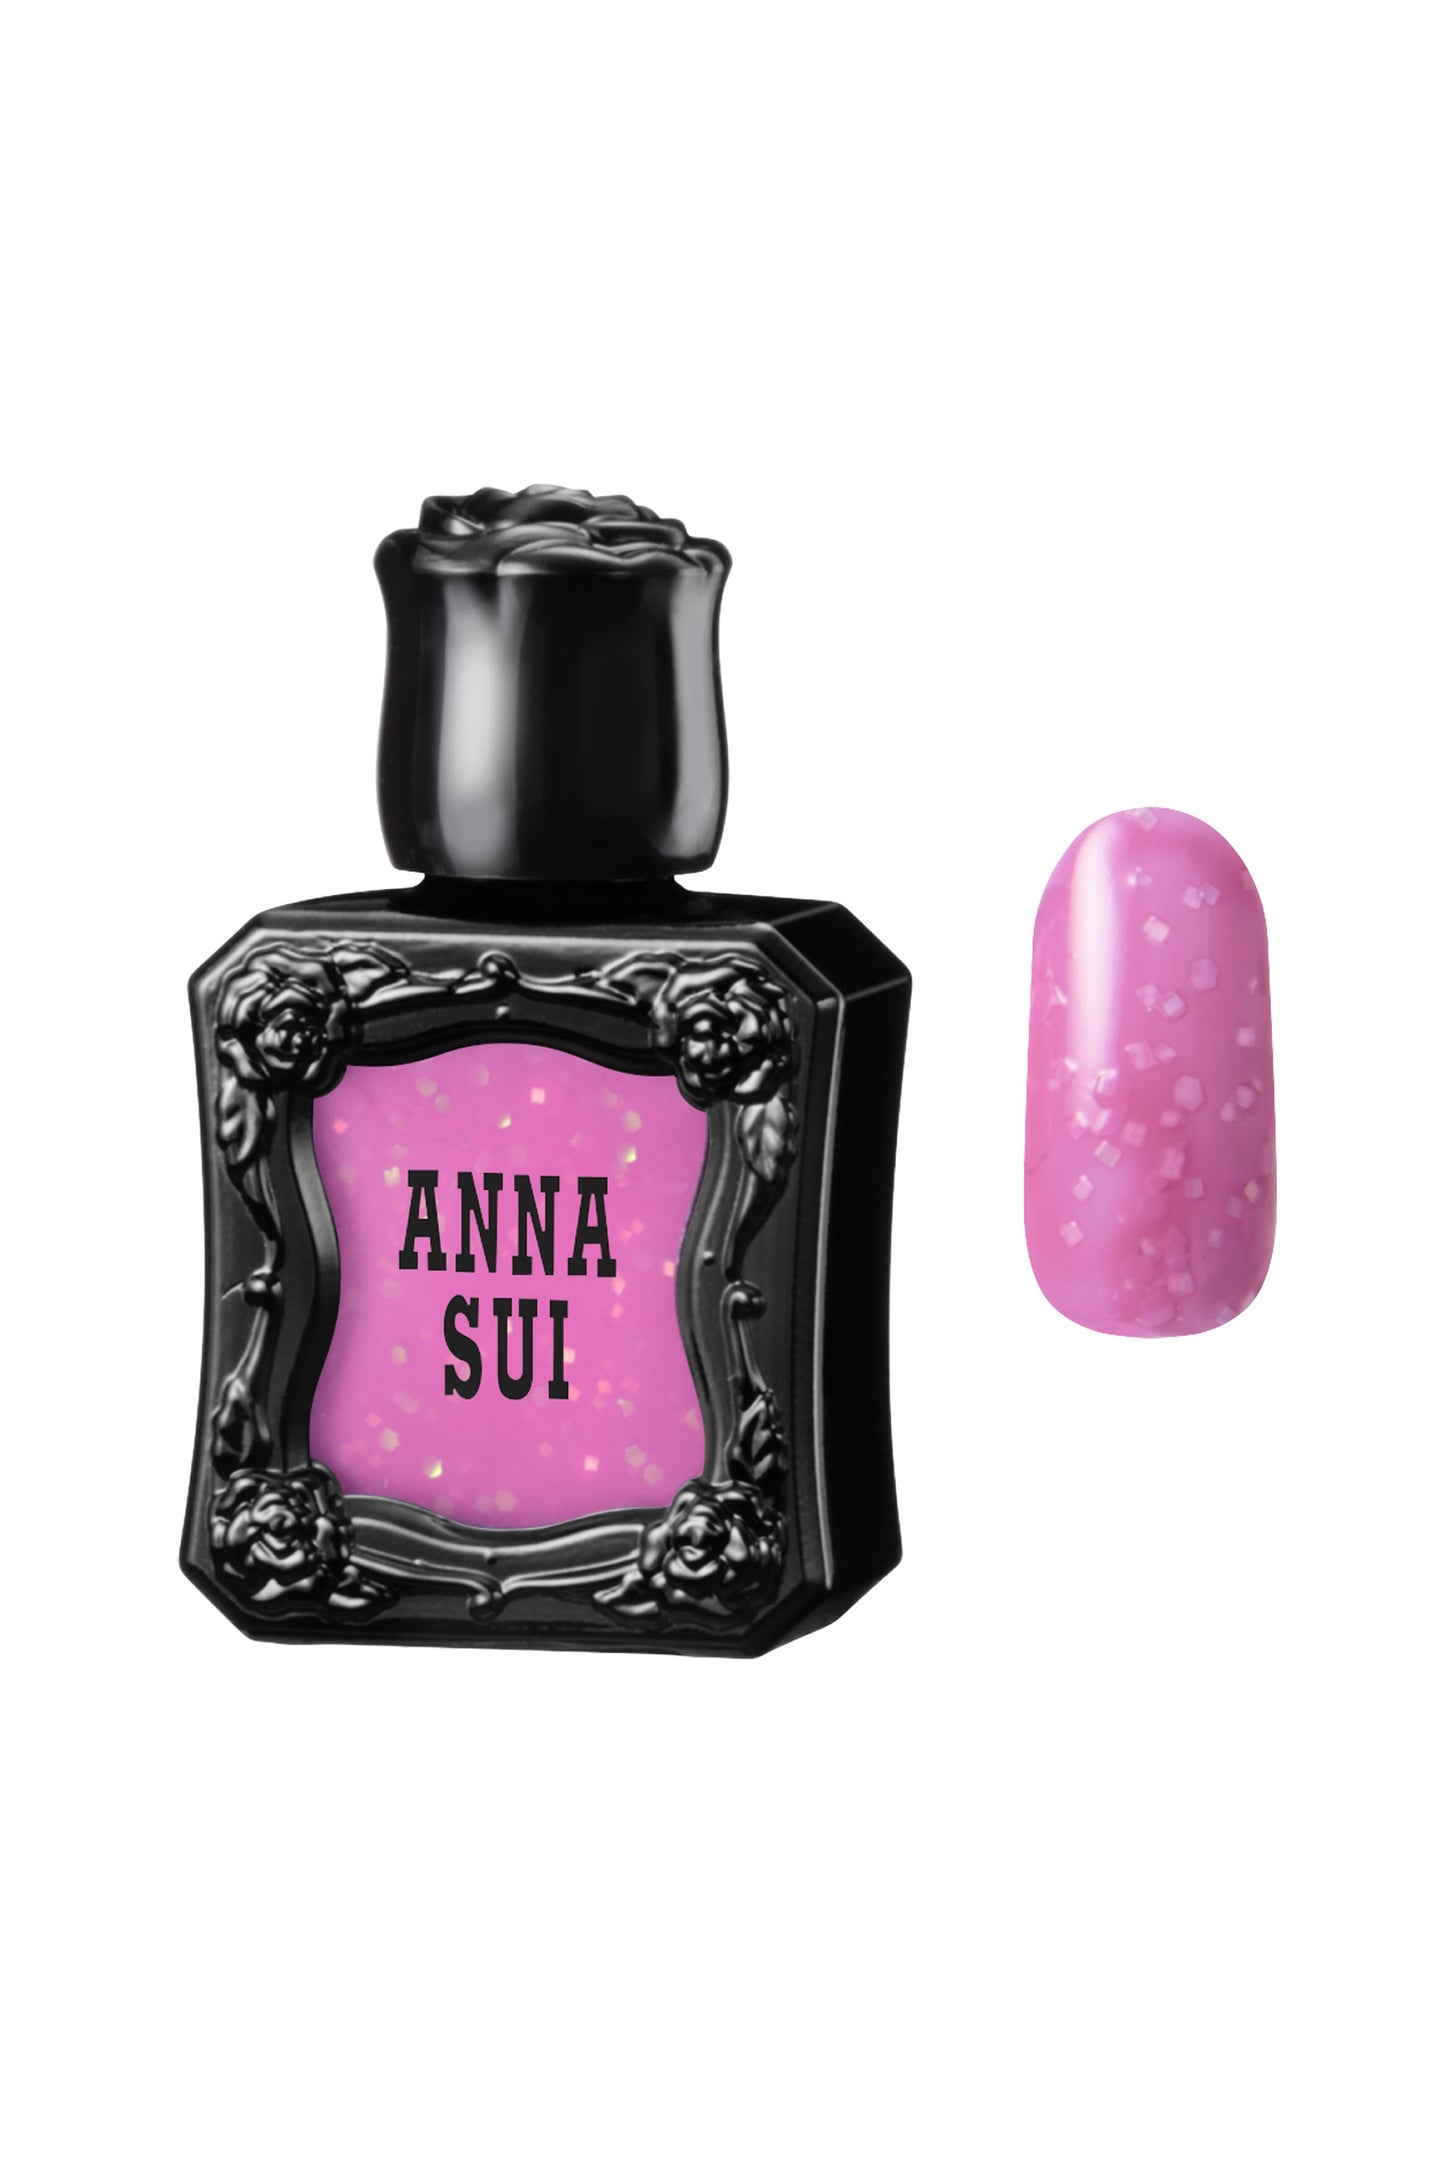 POPPING BERRY Nail Polish bottle raised rose pattern, Anna Sui in black over nail colors in front